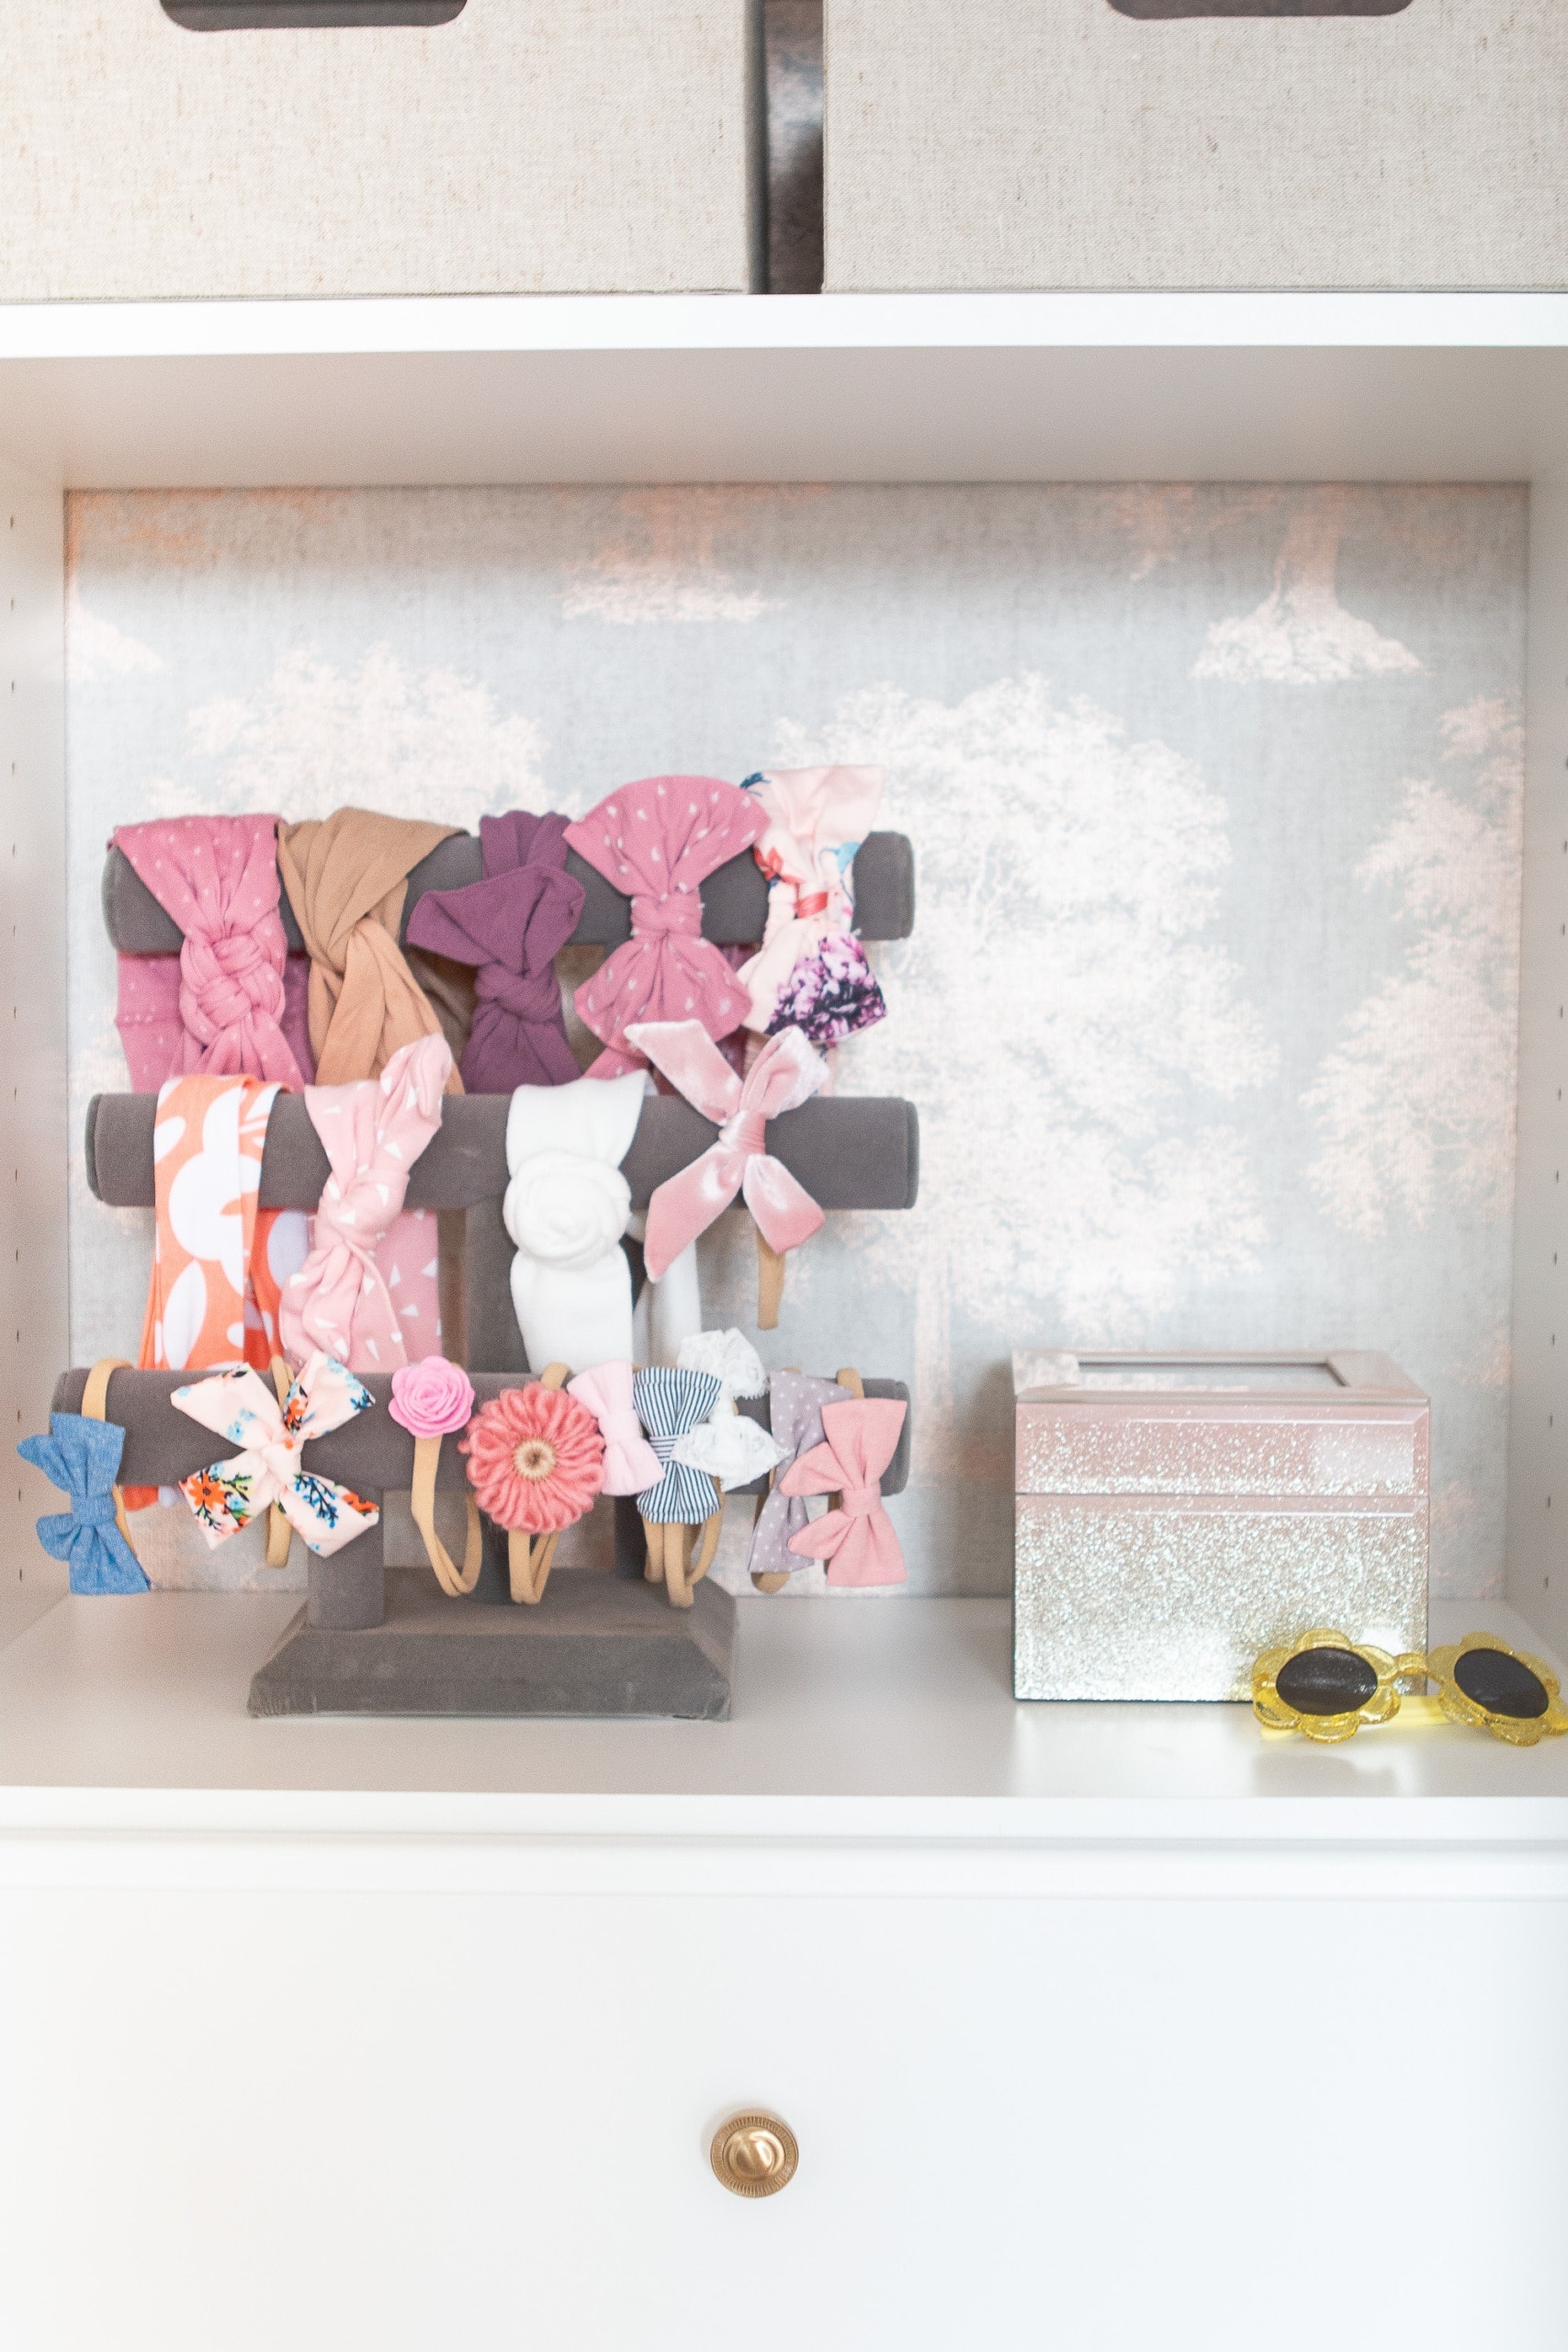 How to display bows in an organized nursery closet